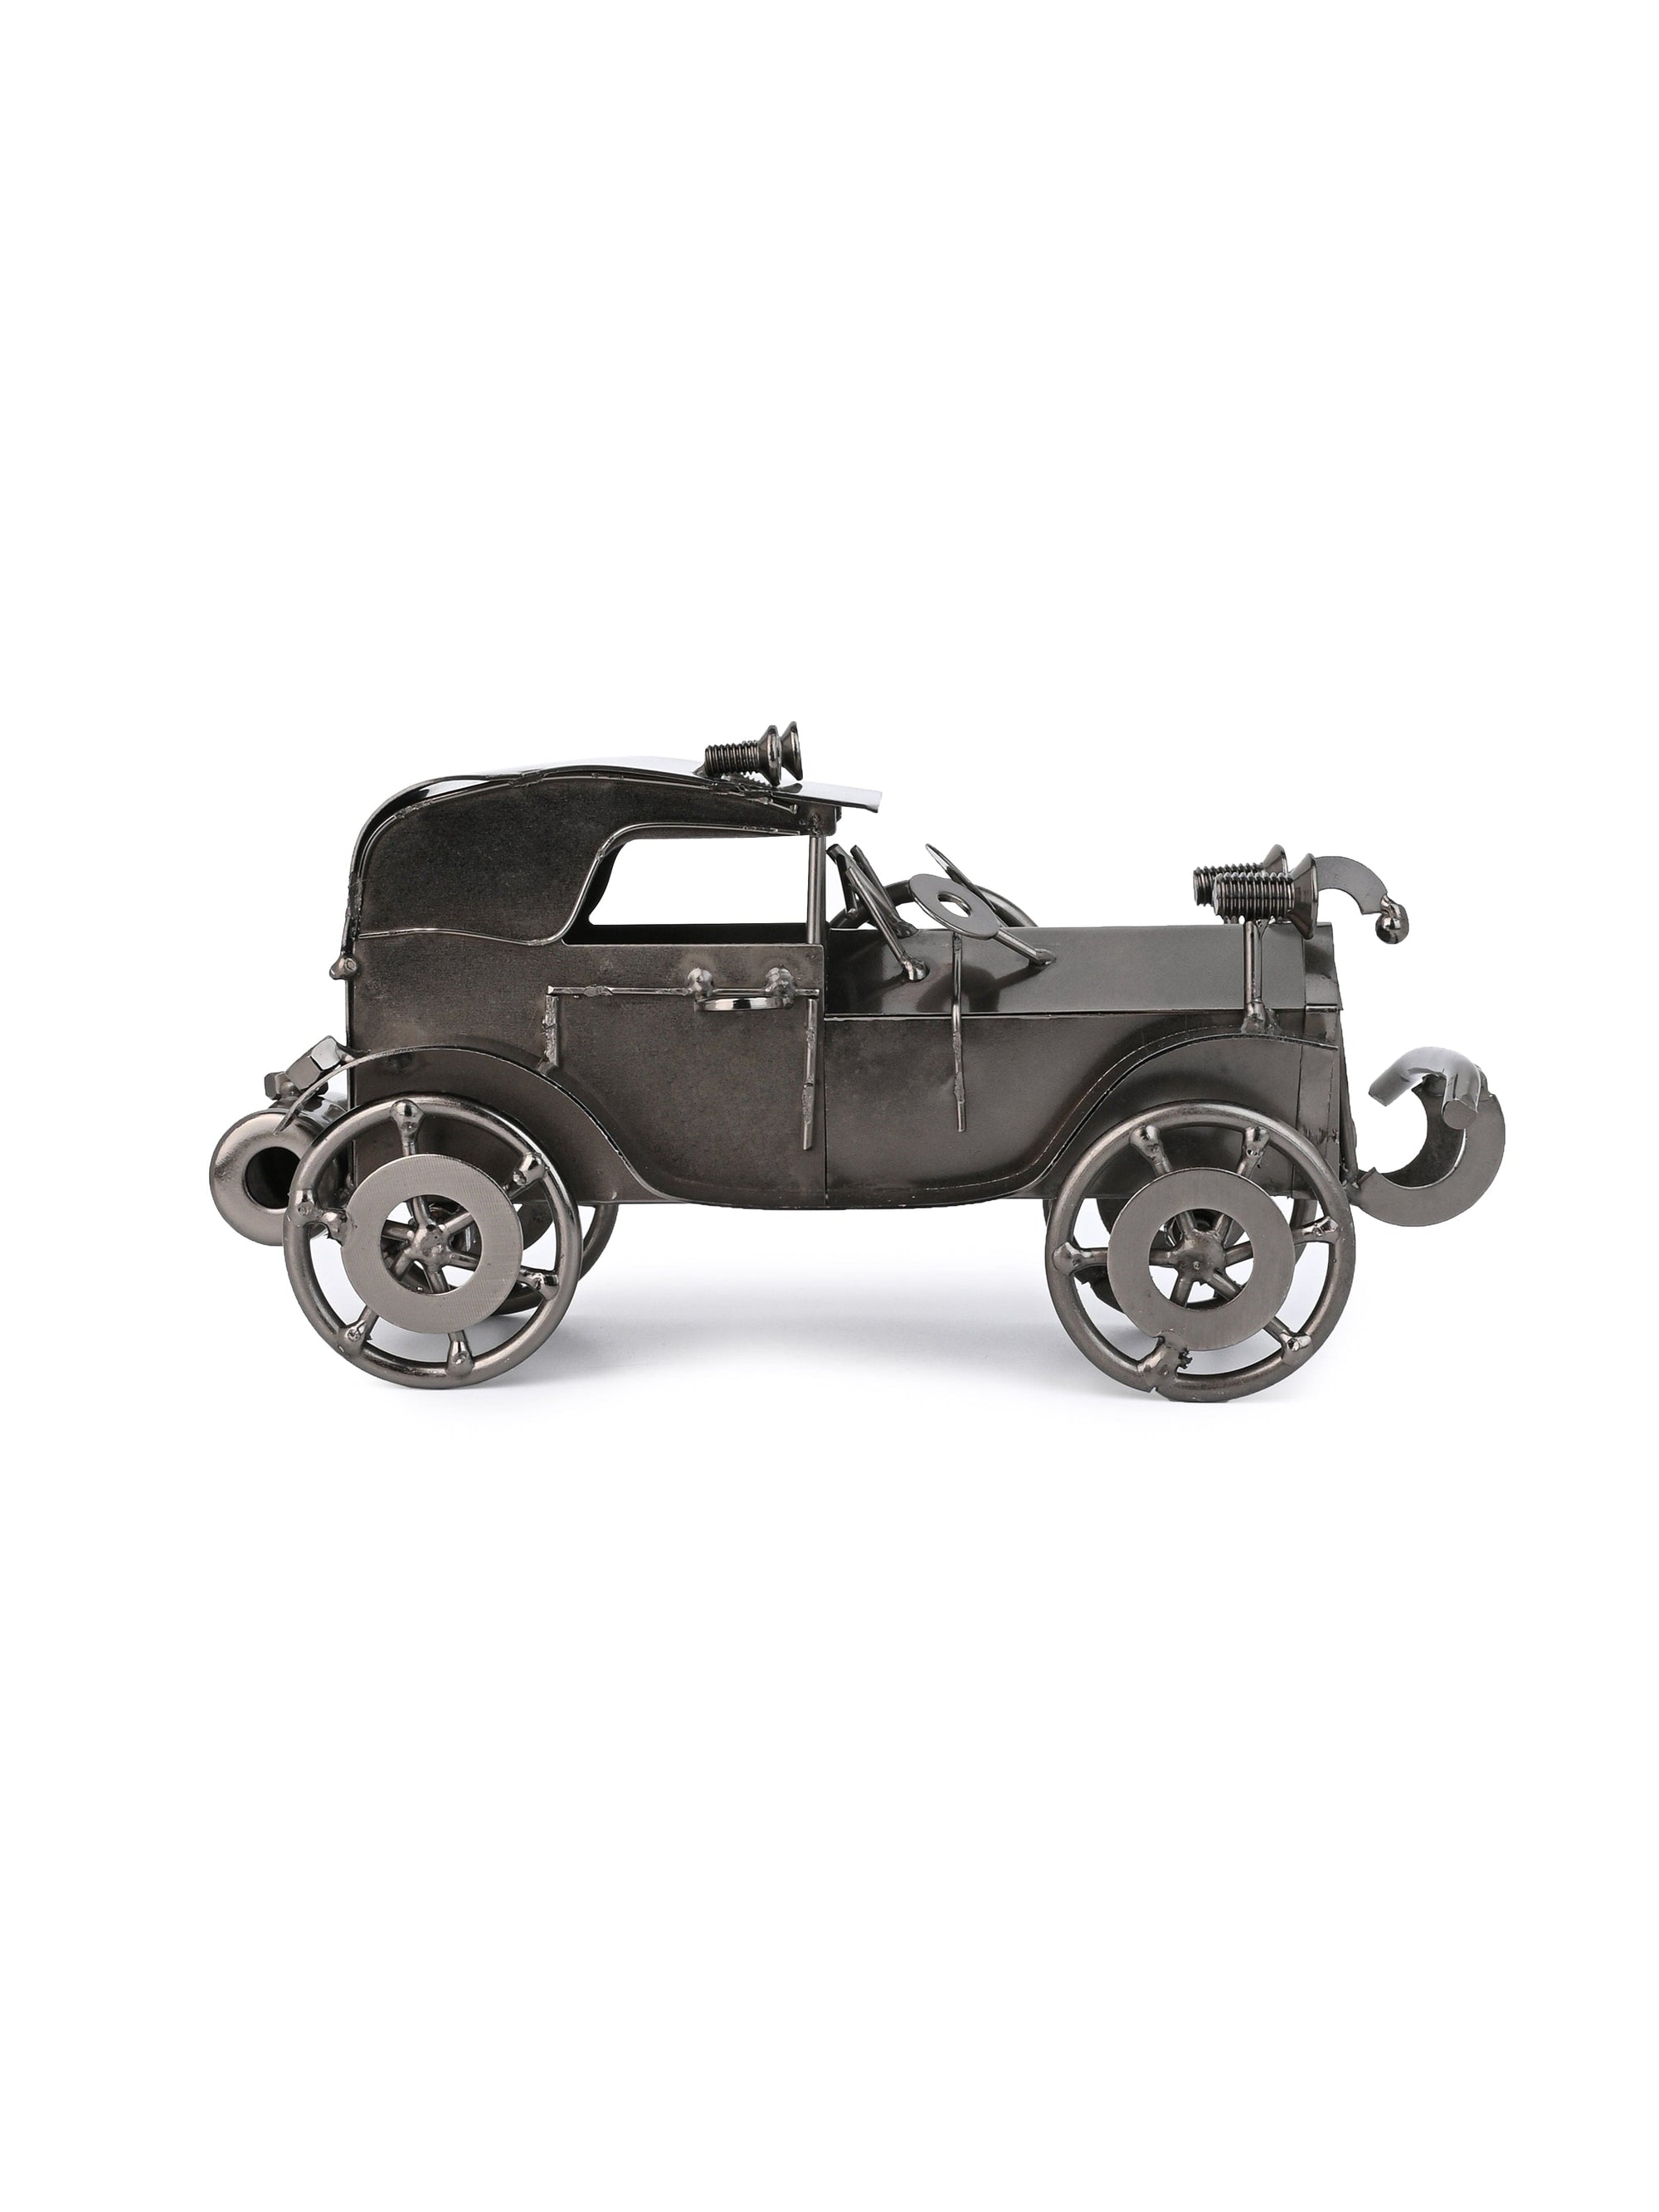 Miniature Replica of Vintage Car for Home Office Decor - 8 inches